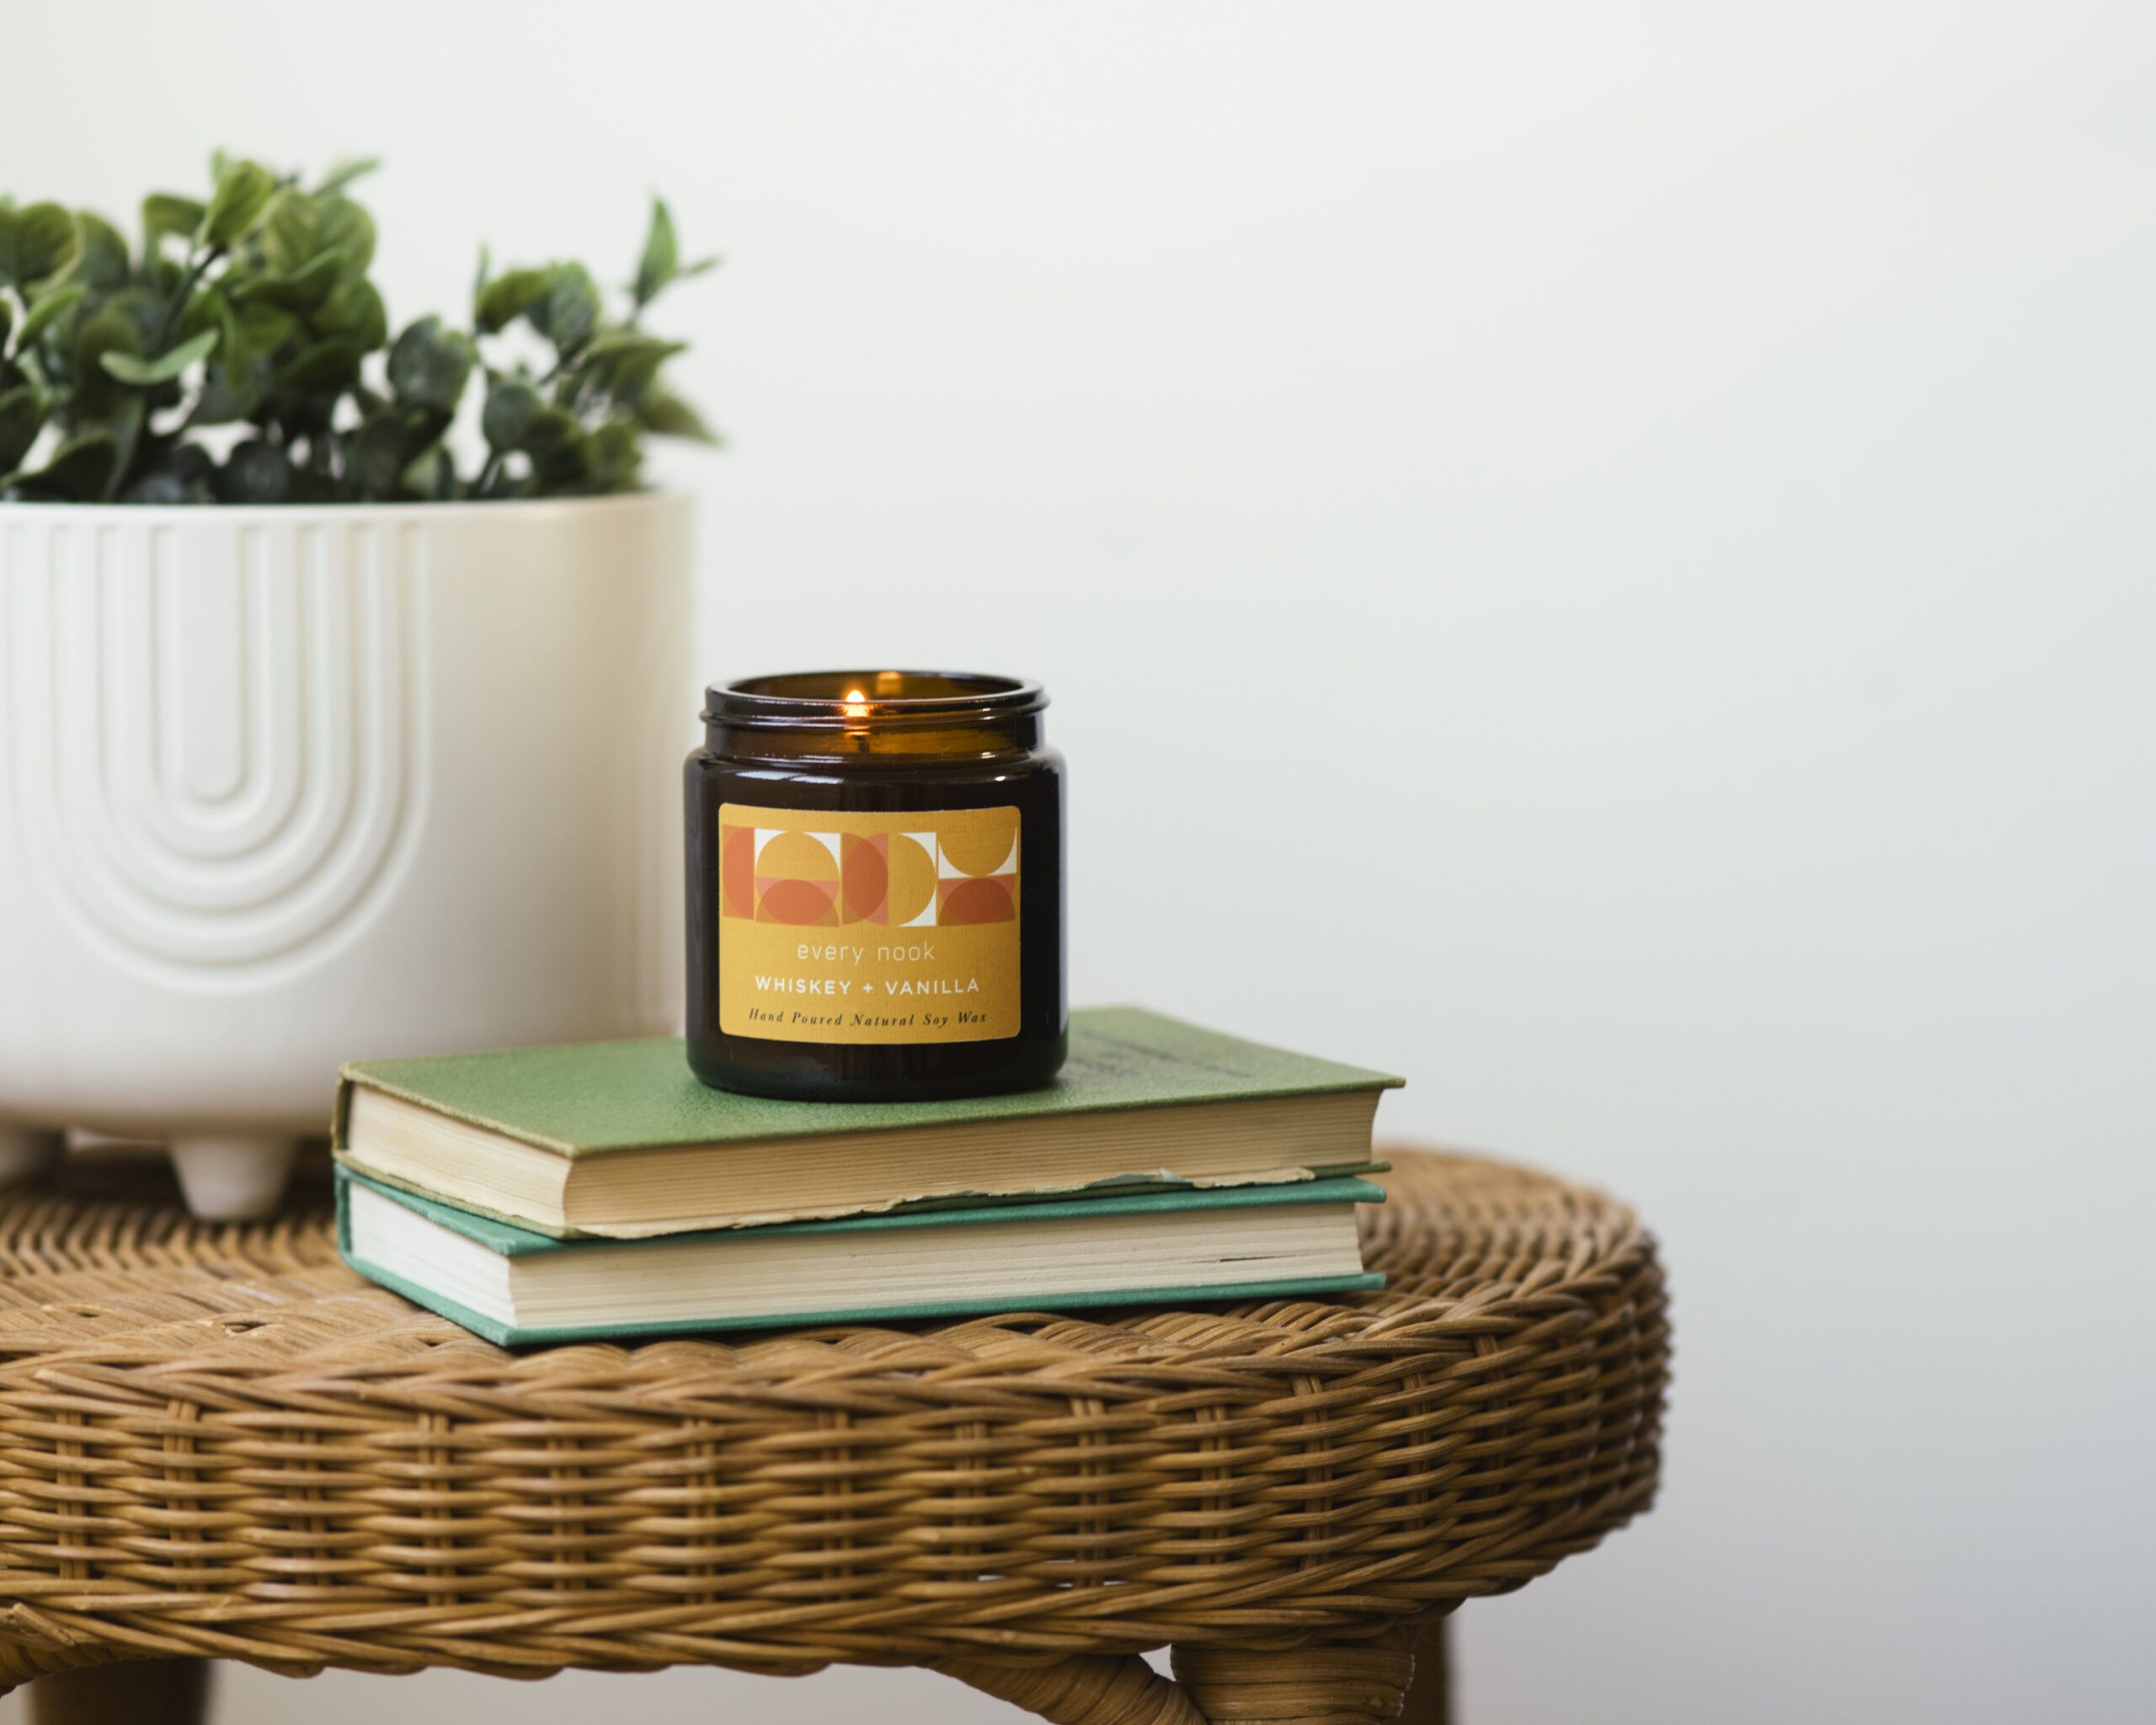 EveryNookCandles-HB-36-scaled